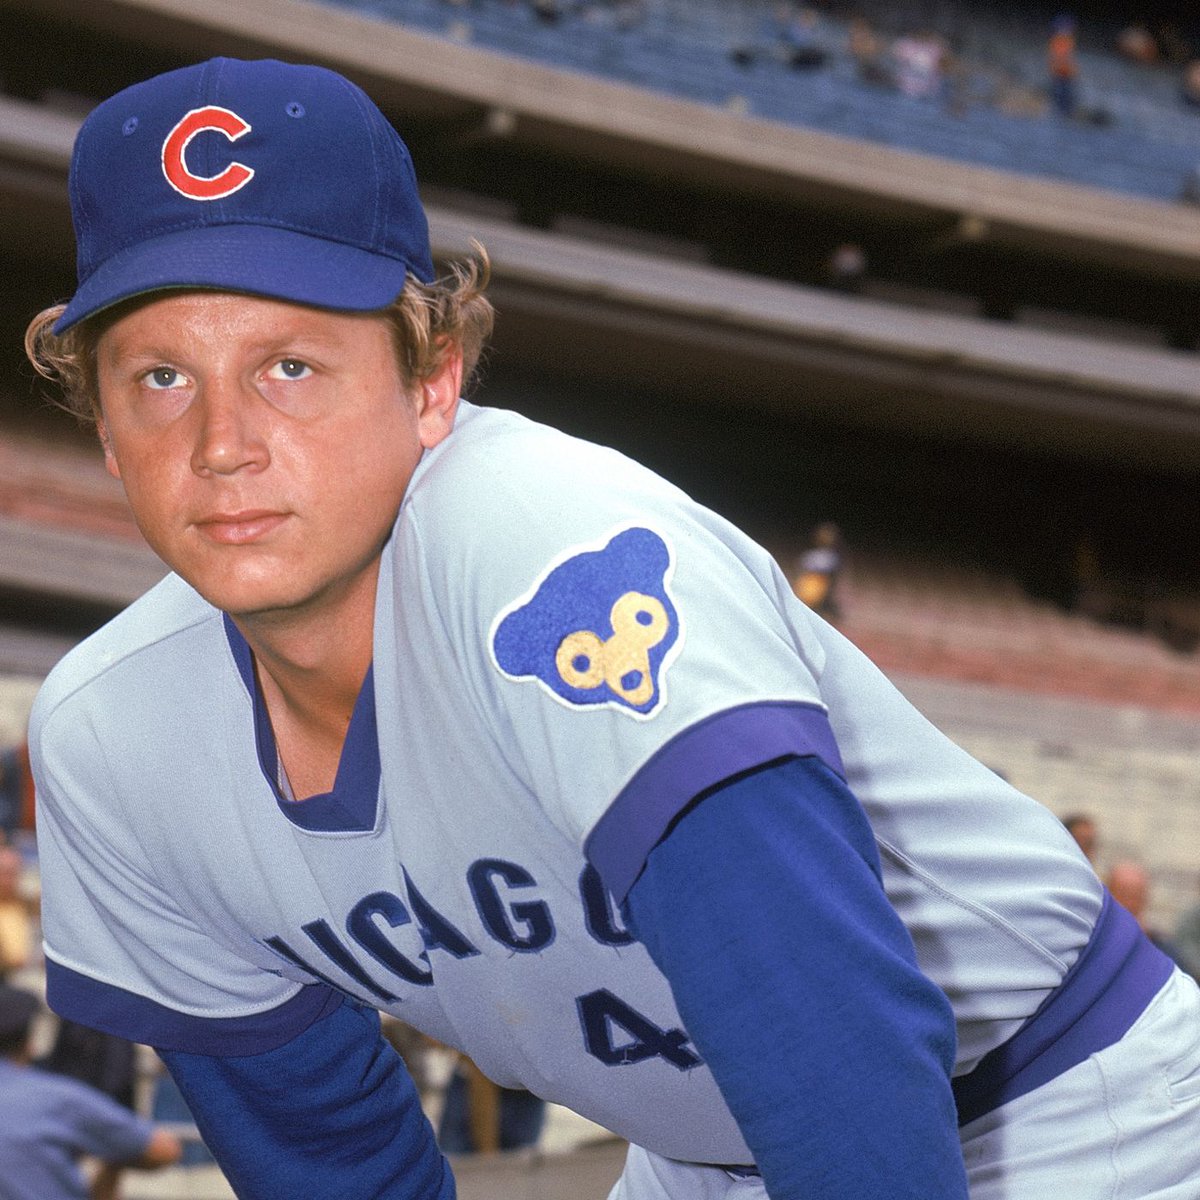 #OTD in 1972: @Cubs rookie Burt Hooton pitches a 4-0 no-hitter against the Phillies in front of fewer than 10,000 fans on a drizzly Sunday at Wrigley Field. Hooton pulls off the feat in only his fourth major league game despite walking seven.